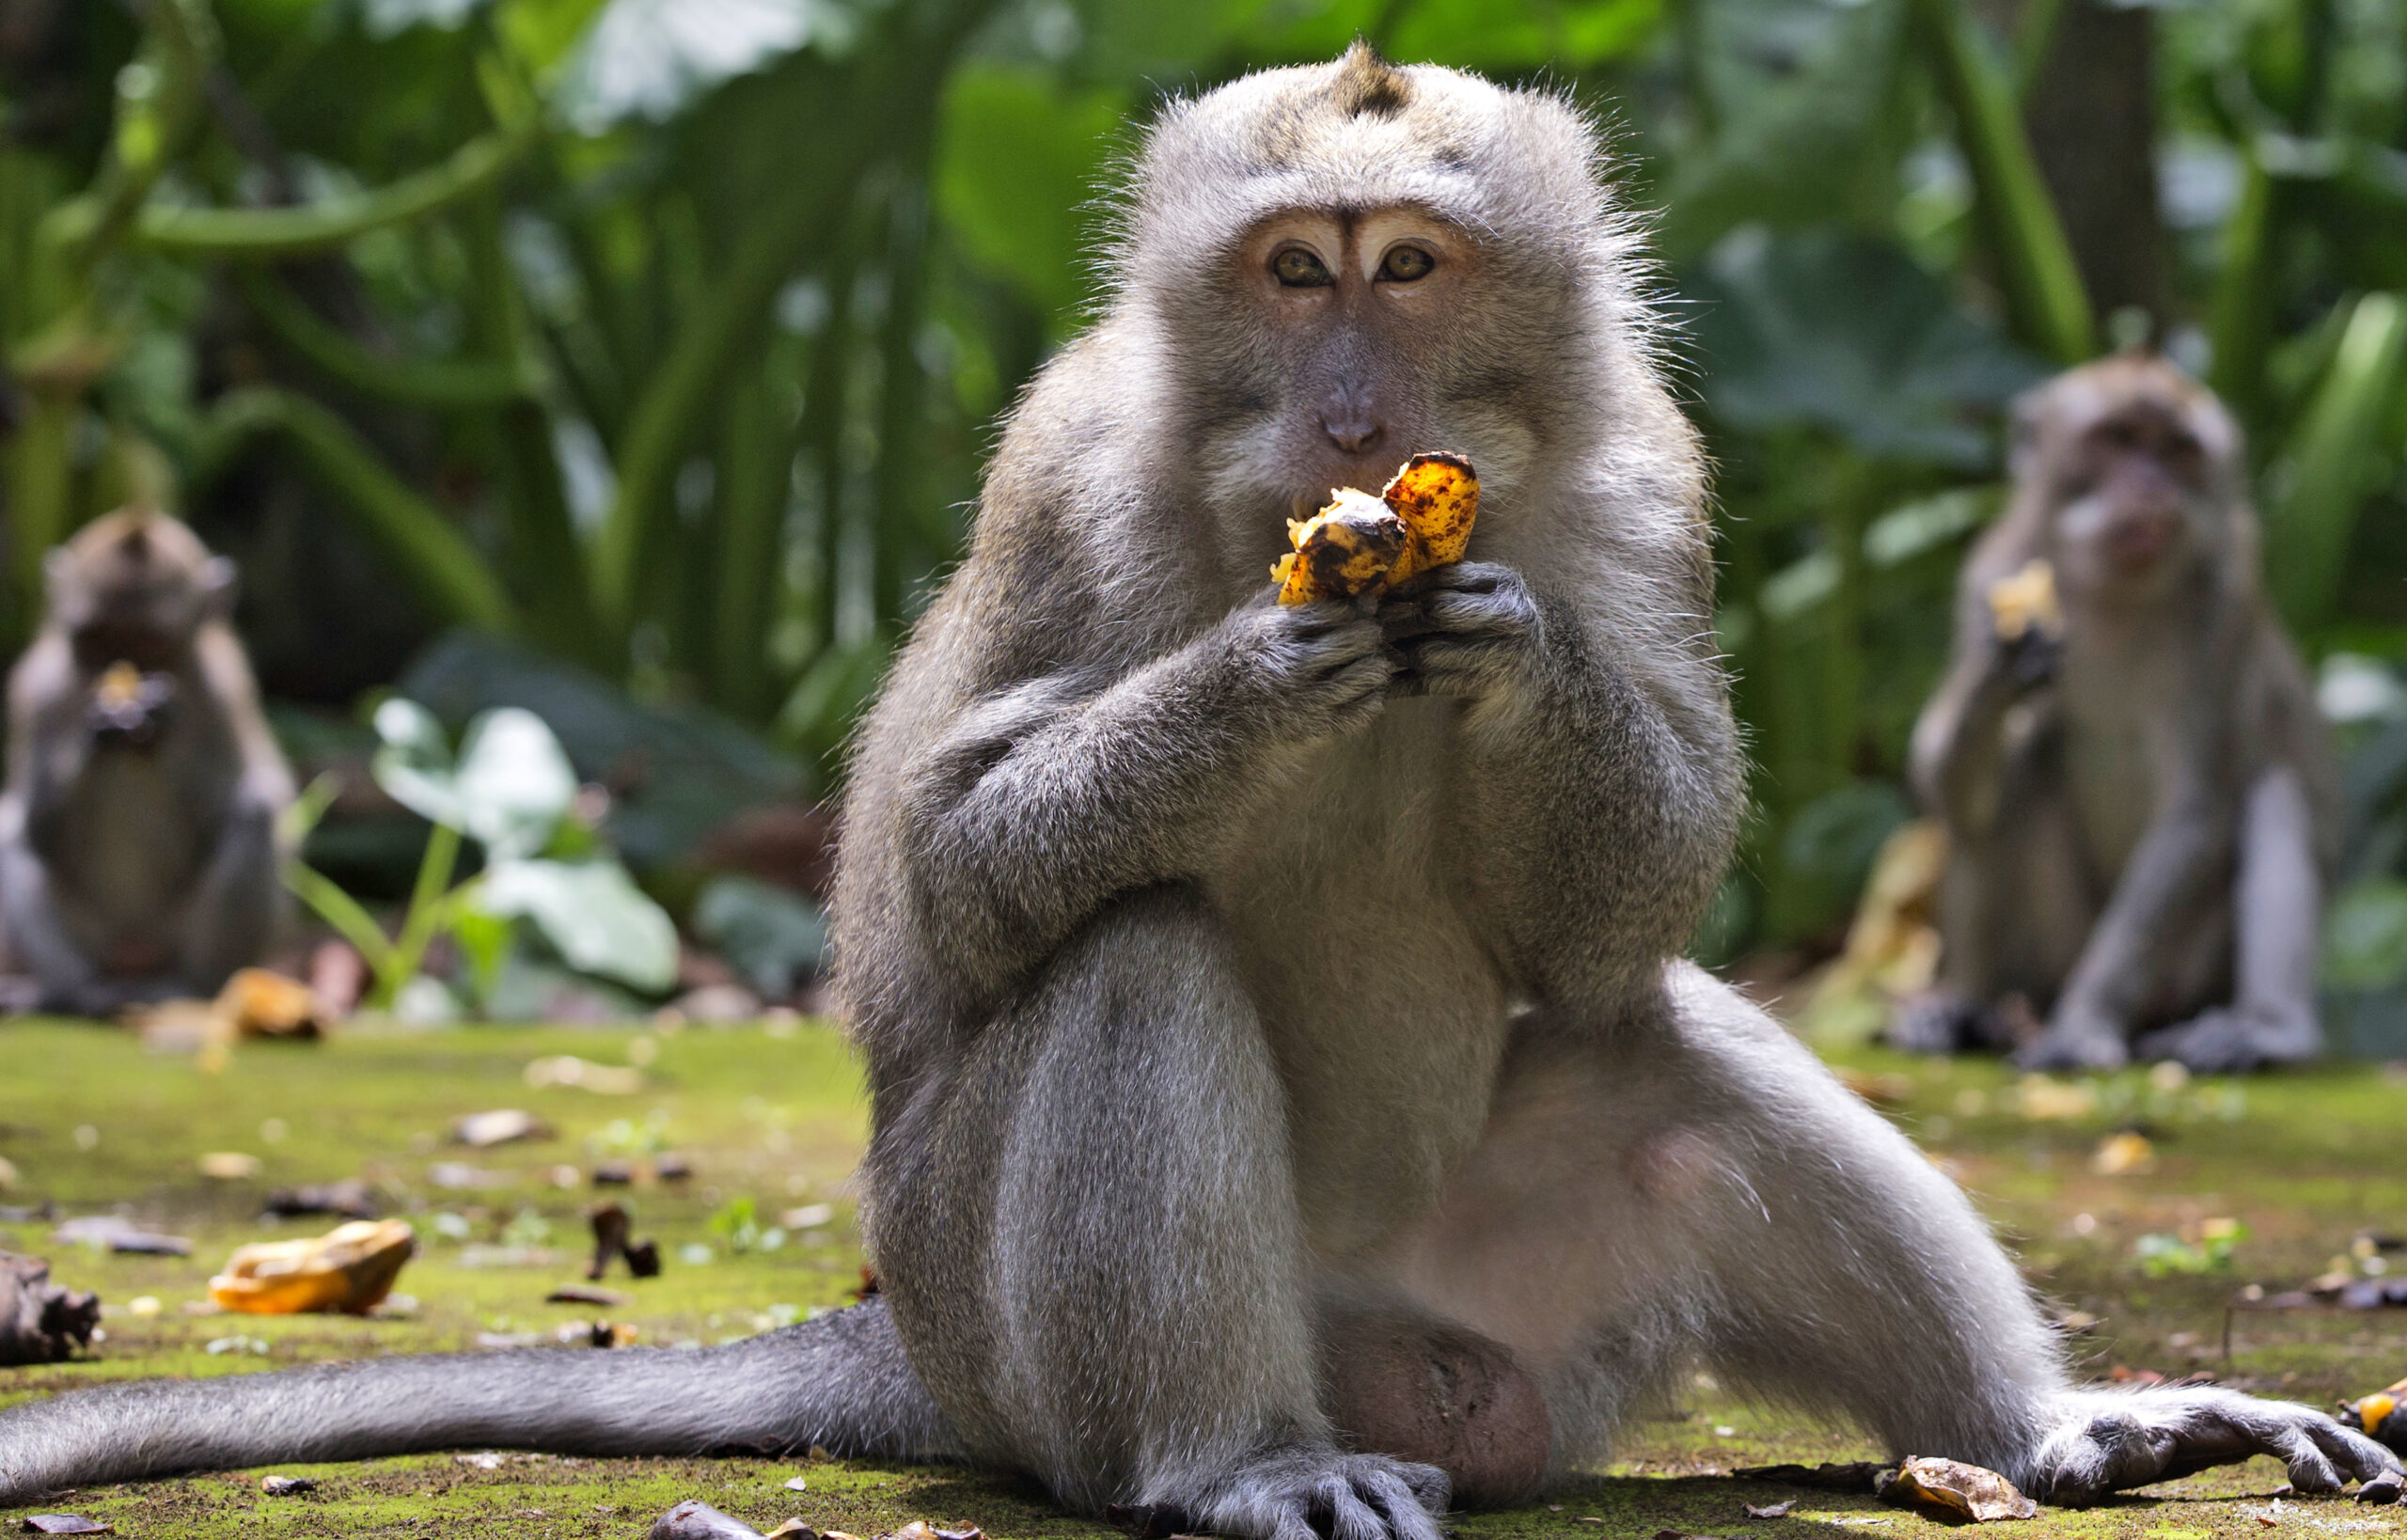 Macaques eat bananas during feeding time at Sangeh Monkey Forest in Sangeh, Bali Island, Indonesia, Wednesday, Sept. 1, 2021. Deprived of their preferred food source - the bananas, peanuts and other goodies brought in by the tourists now kept away by the coronavirus - hungry monkeys on the resort island of Bali have taken to raiding villagers’ homes in the search for something tasty. (AP Photo/Firdia Lisnawati)